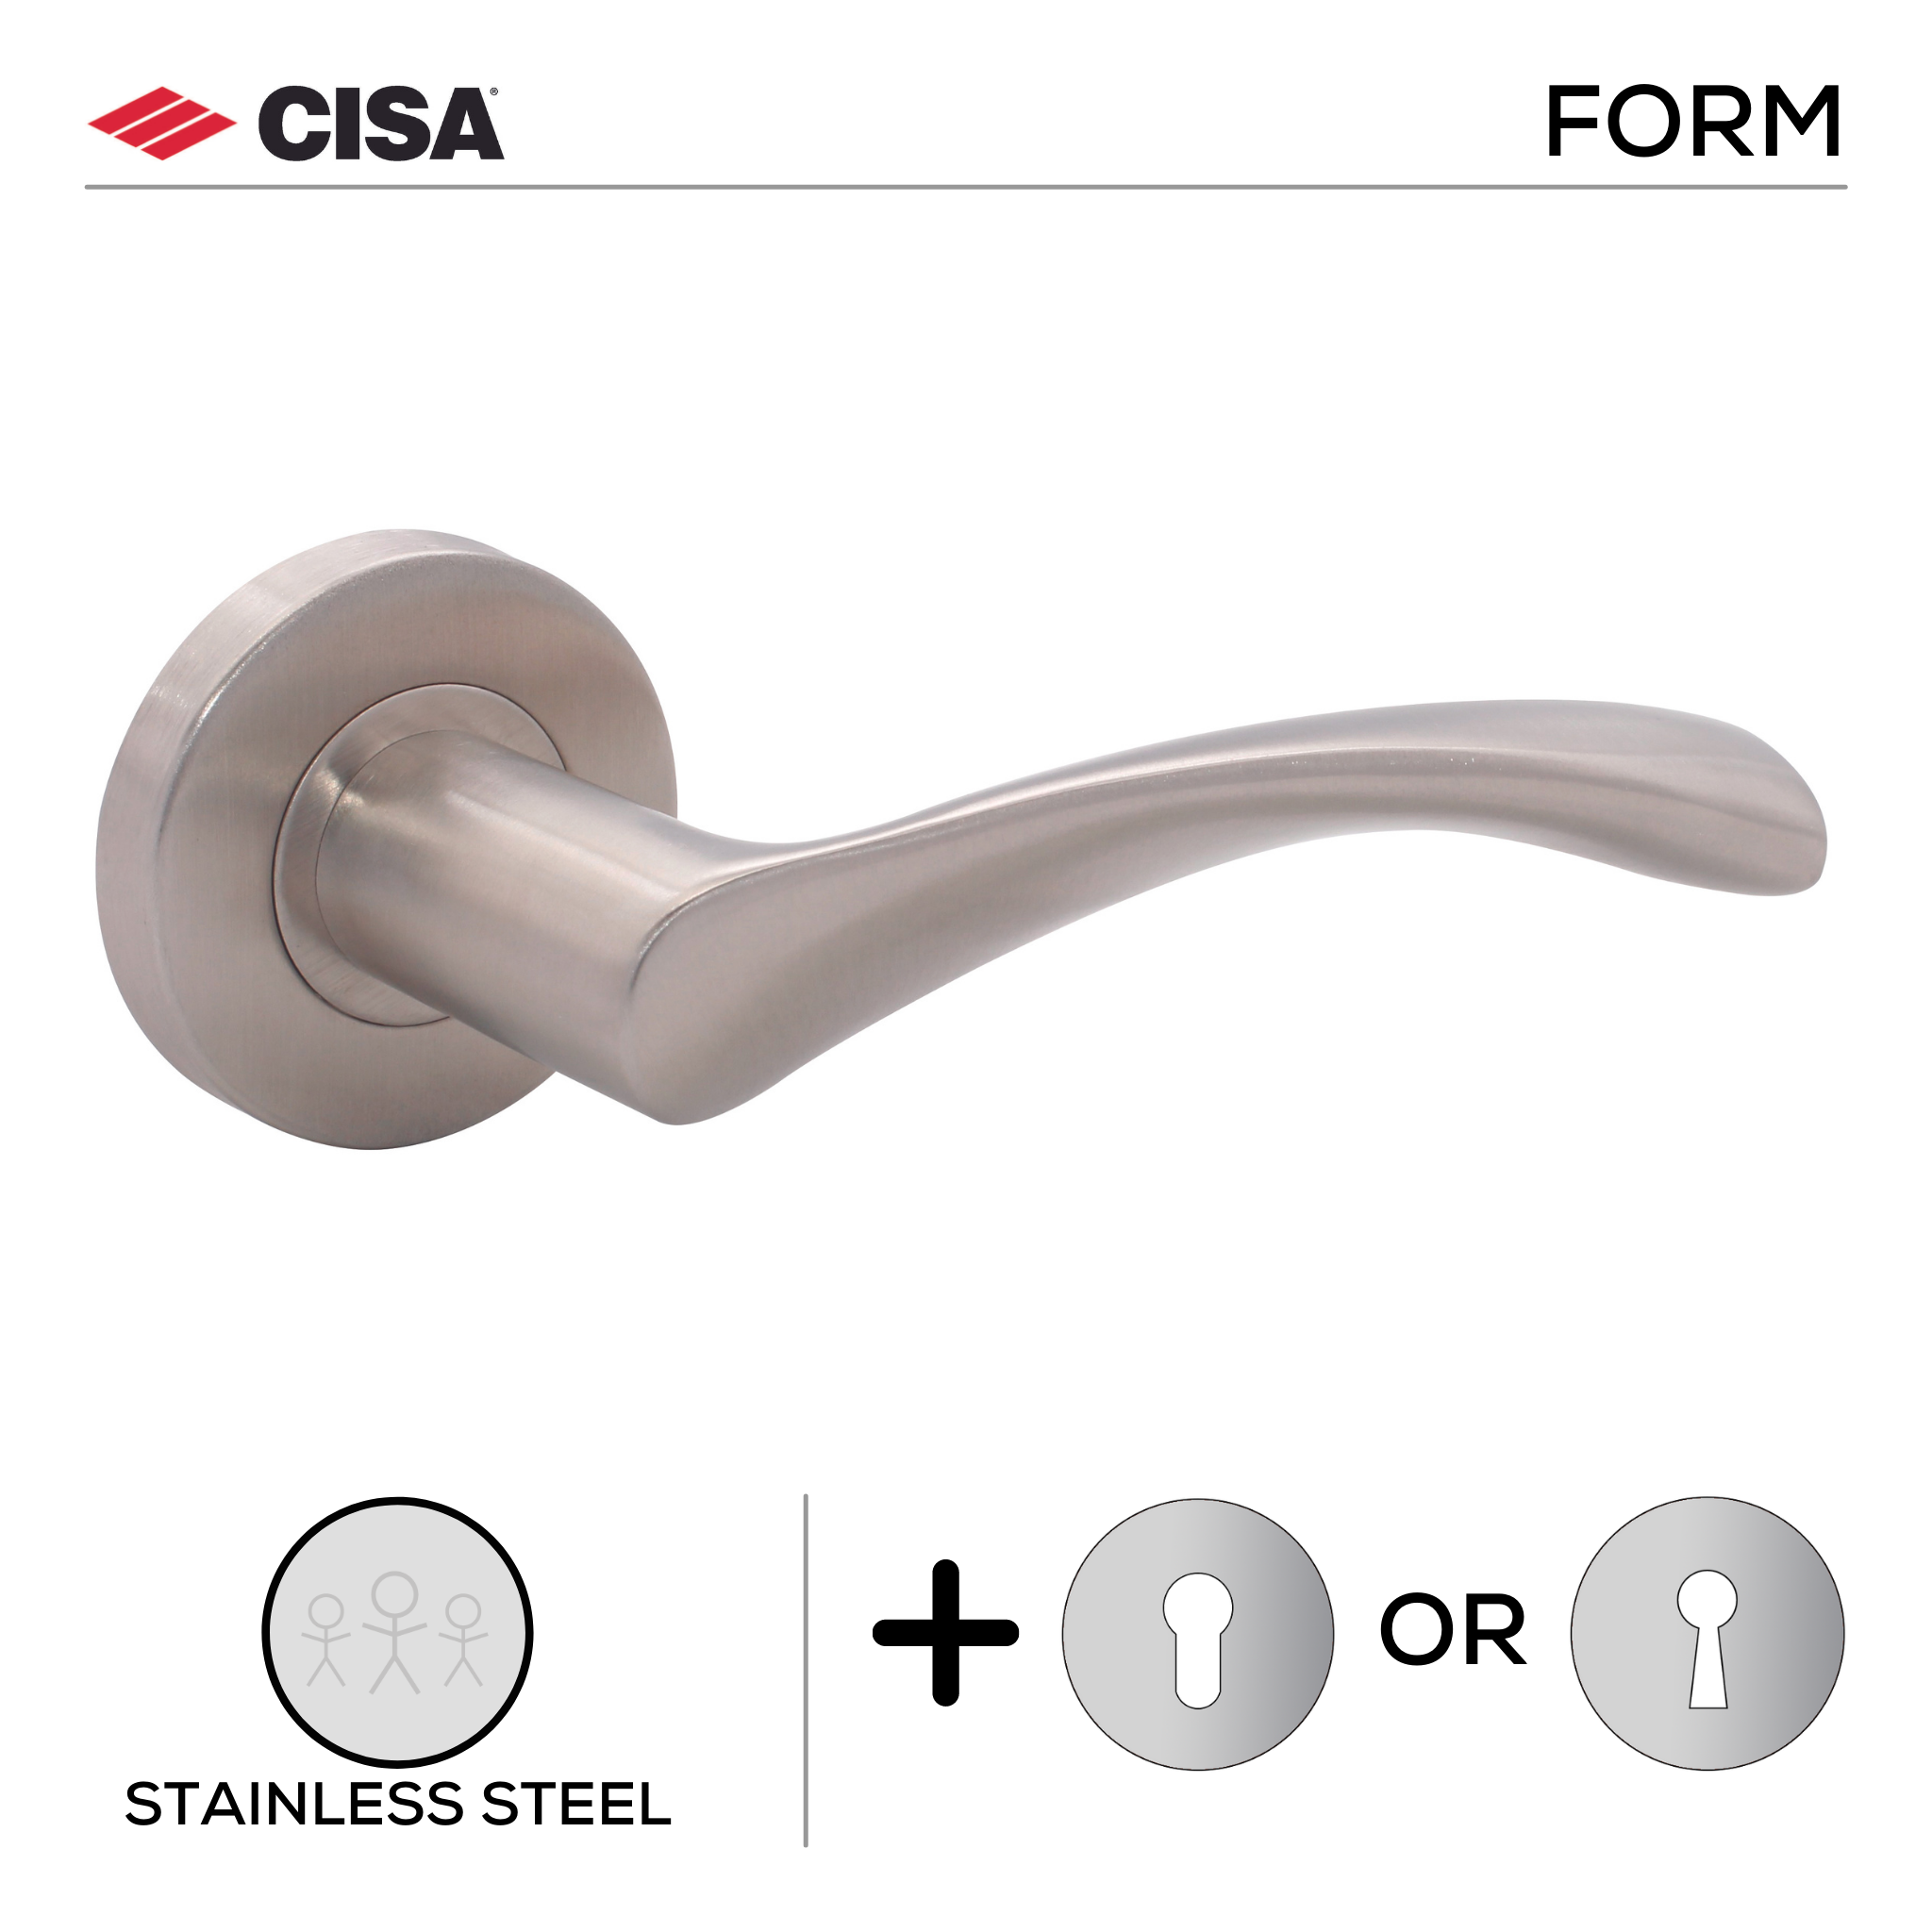 FS107.R._.SS, Lever Handles, Form, On Round Rose, With Escutcheons, Stainless Steel, CISA